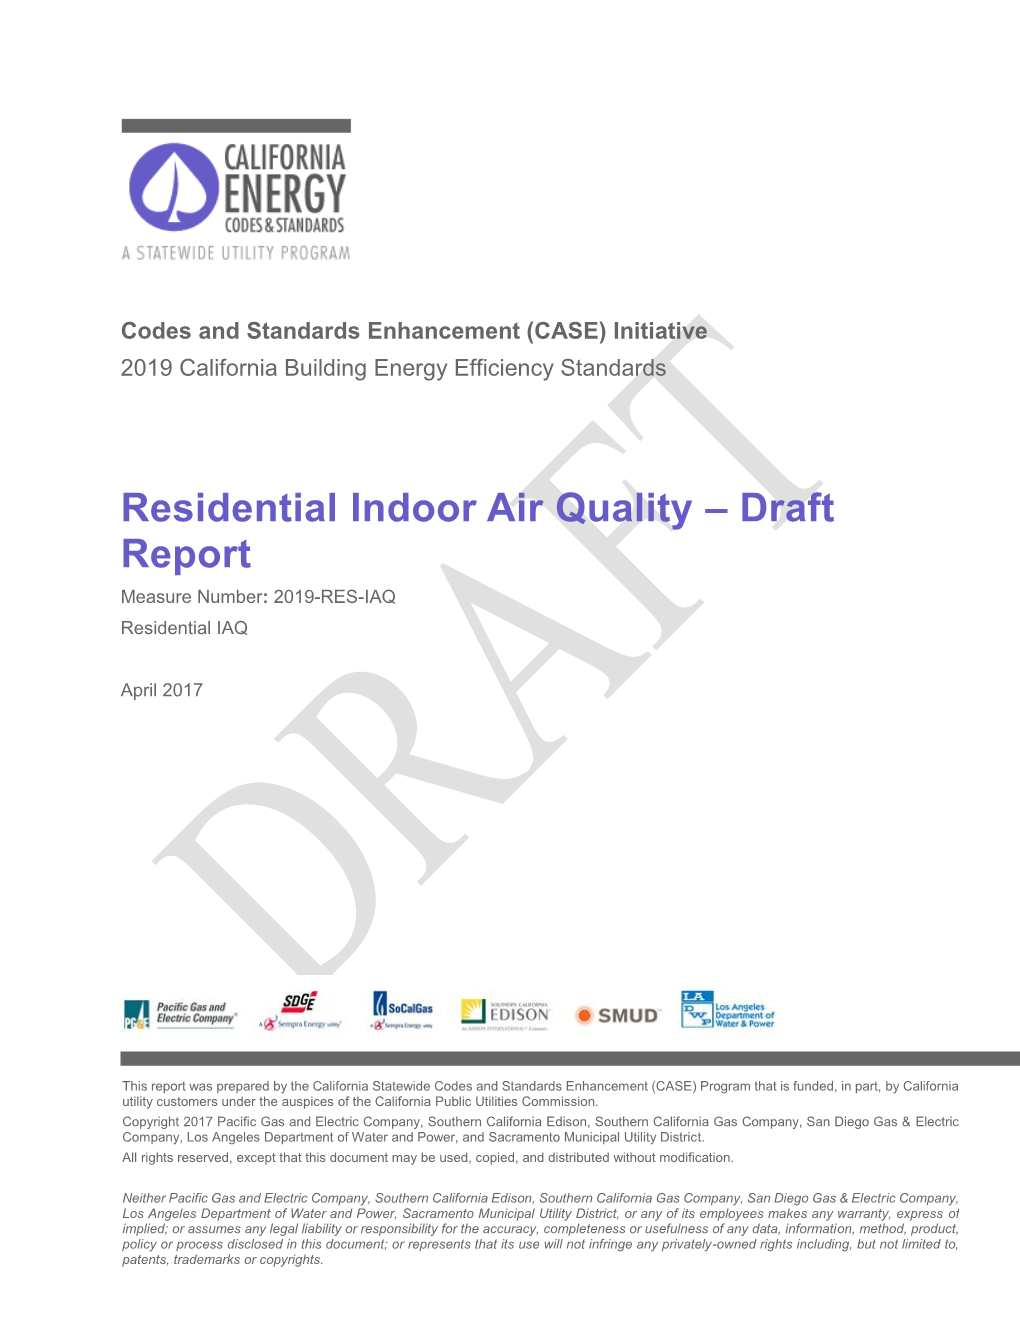 Residential Indoor Air Quality – Draft Report Measure Number: 2019-RES-IAQ Residential IAQ